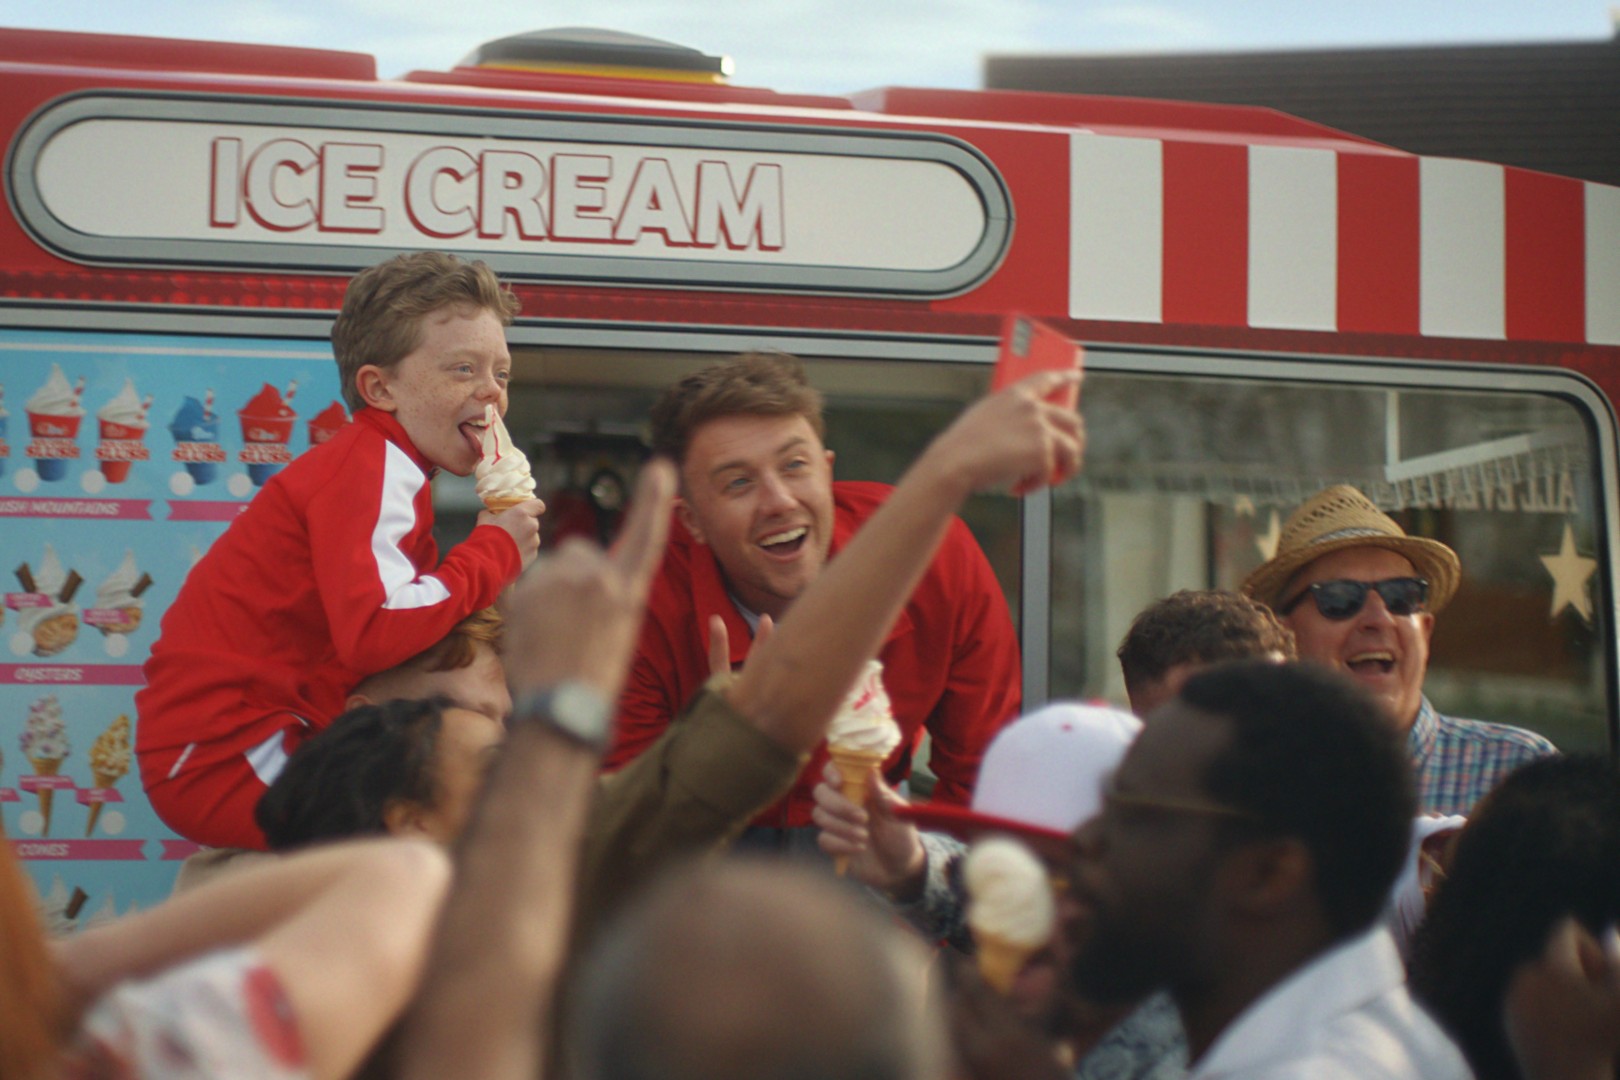 Roman Kemp and public by ice cream van, as part of Vodafone's 'The Nation's Network' campaign